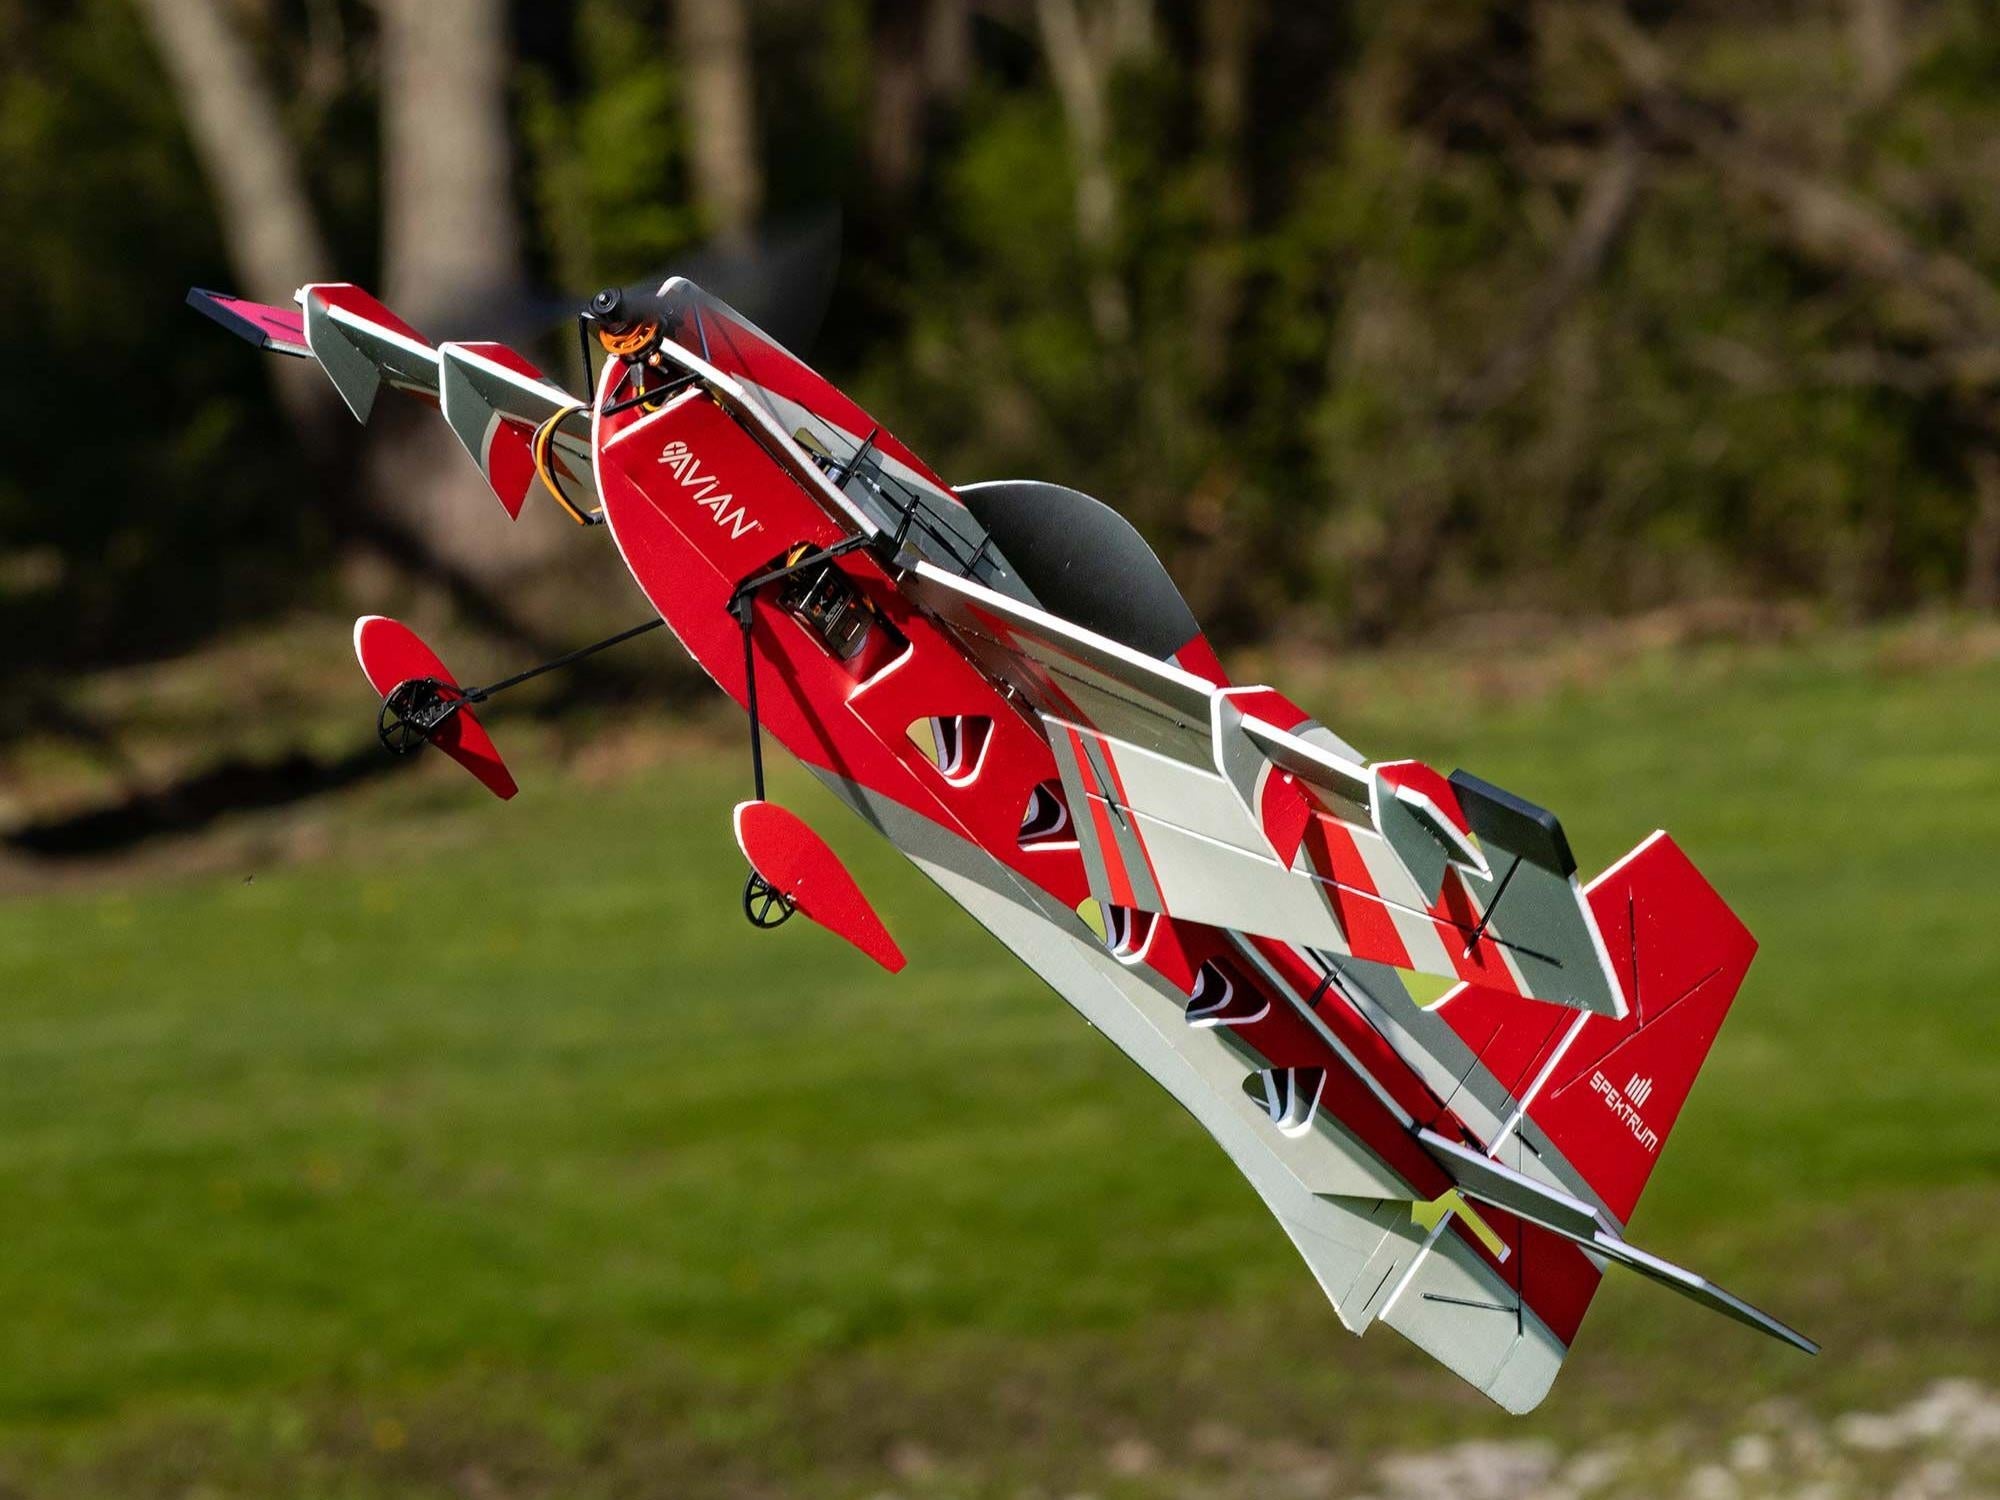 E-Flite Eratix 3D FF (Flat Foamy) 860mm BNF Basic with AS3X and SAFE Select EFL01950